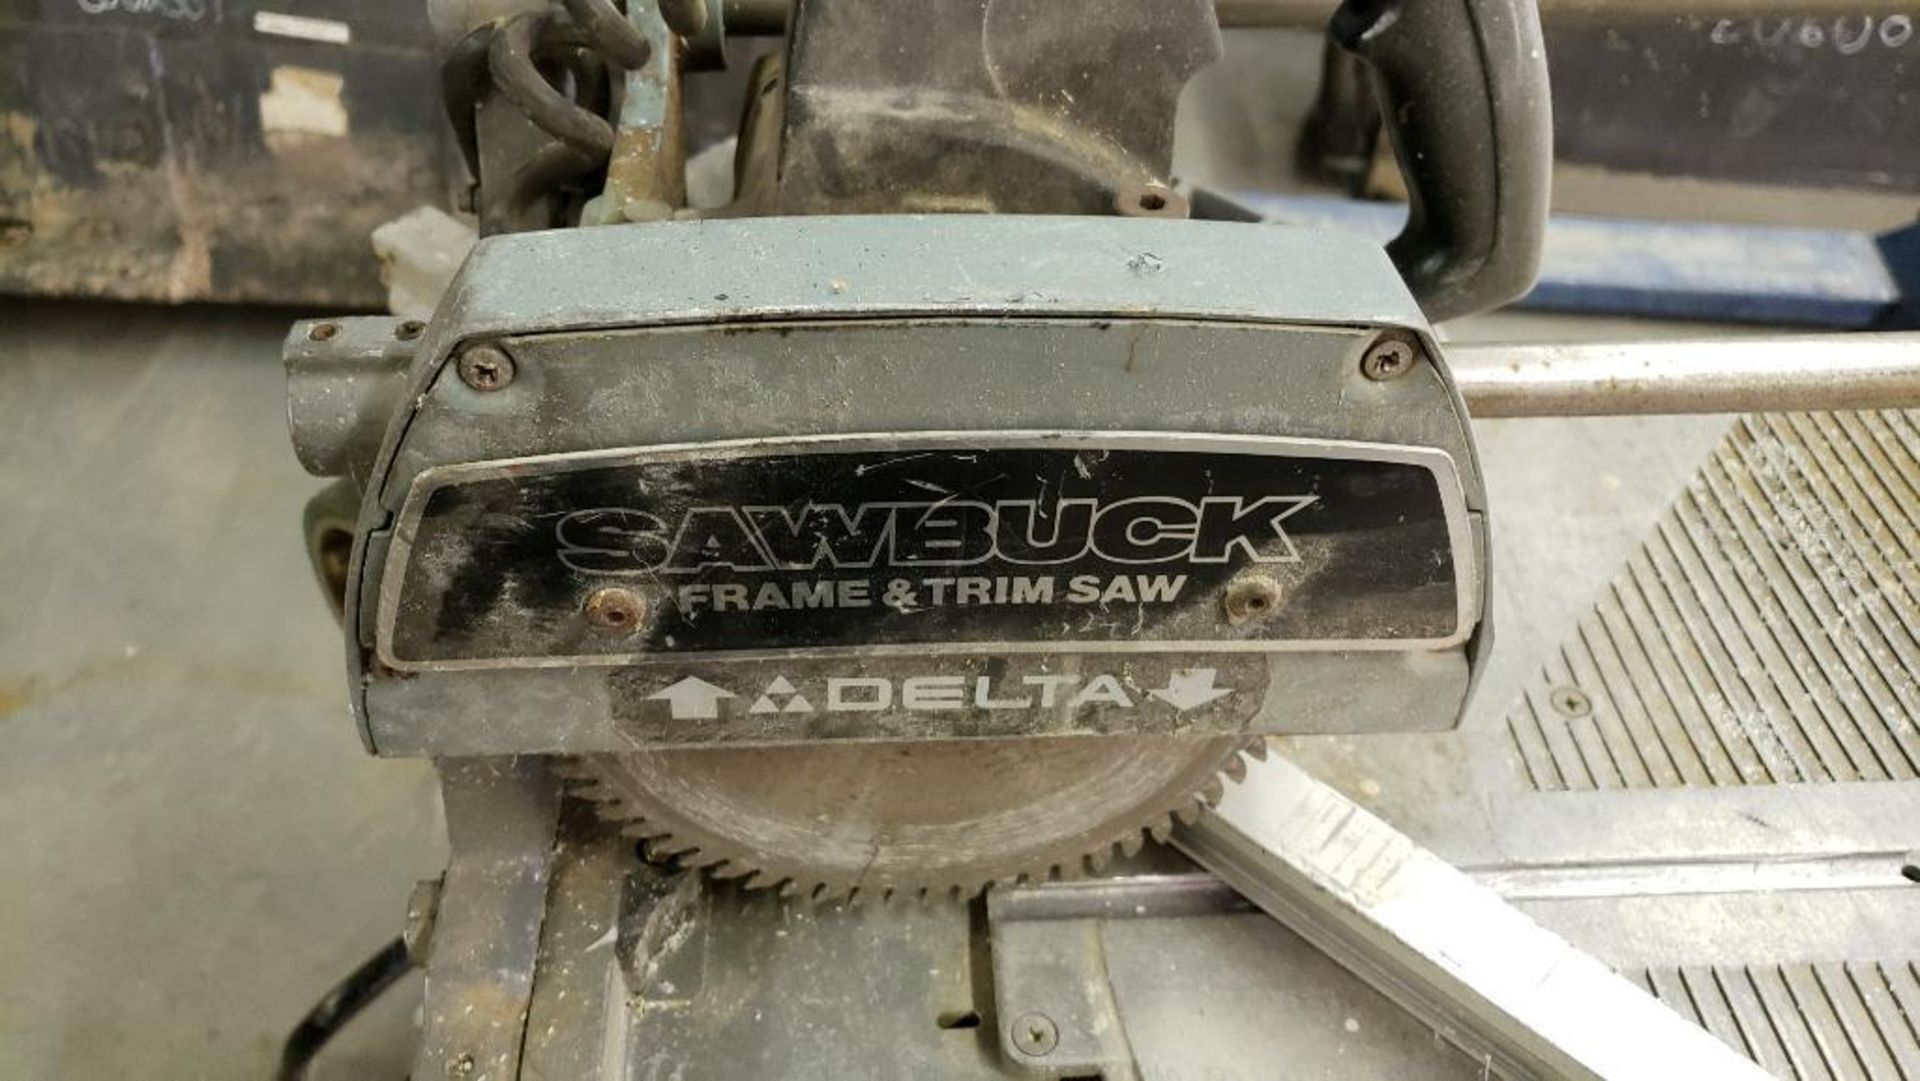 Delta frame and trim saw. Model Sawbuck. Includes stand. - Image 5 of 8